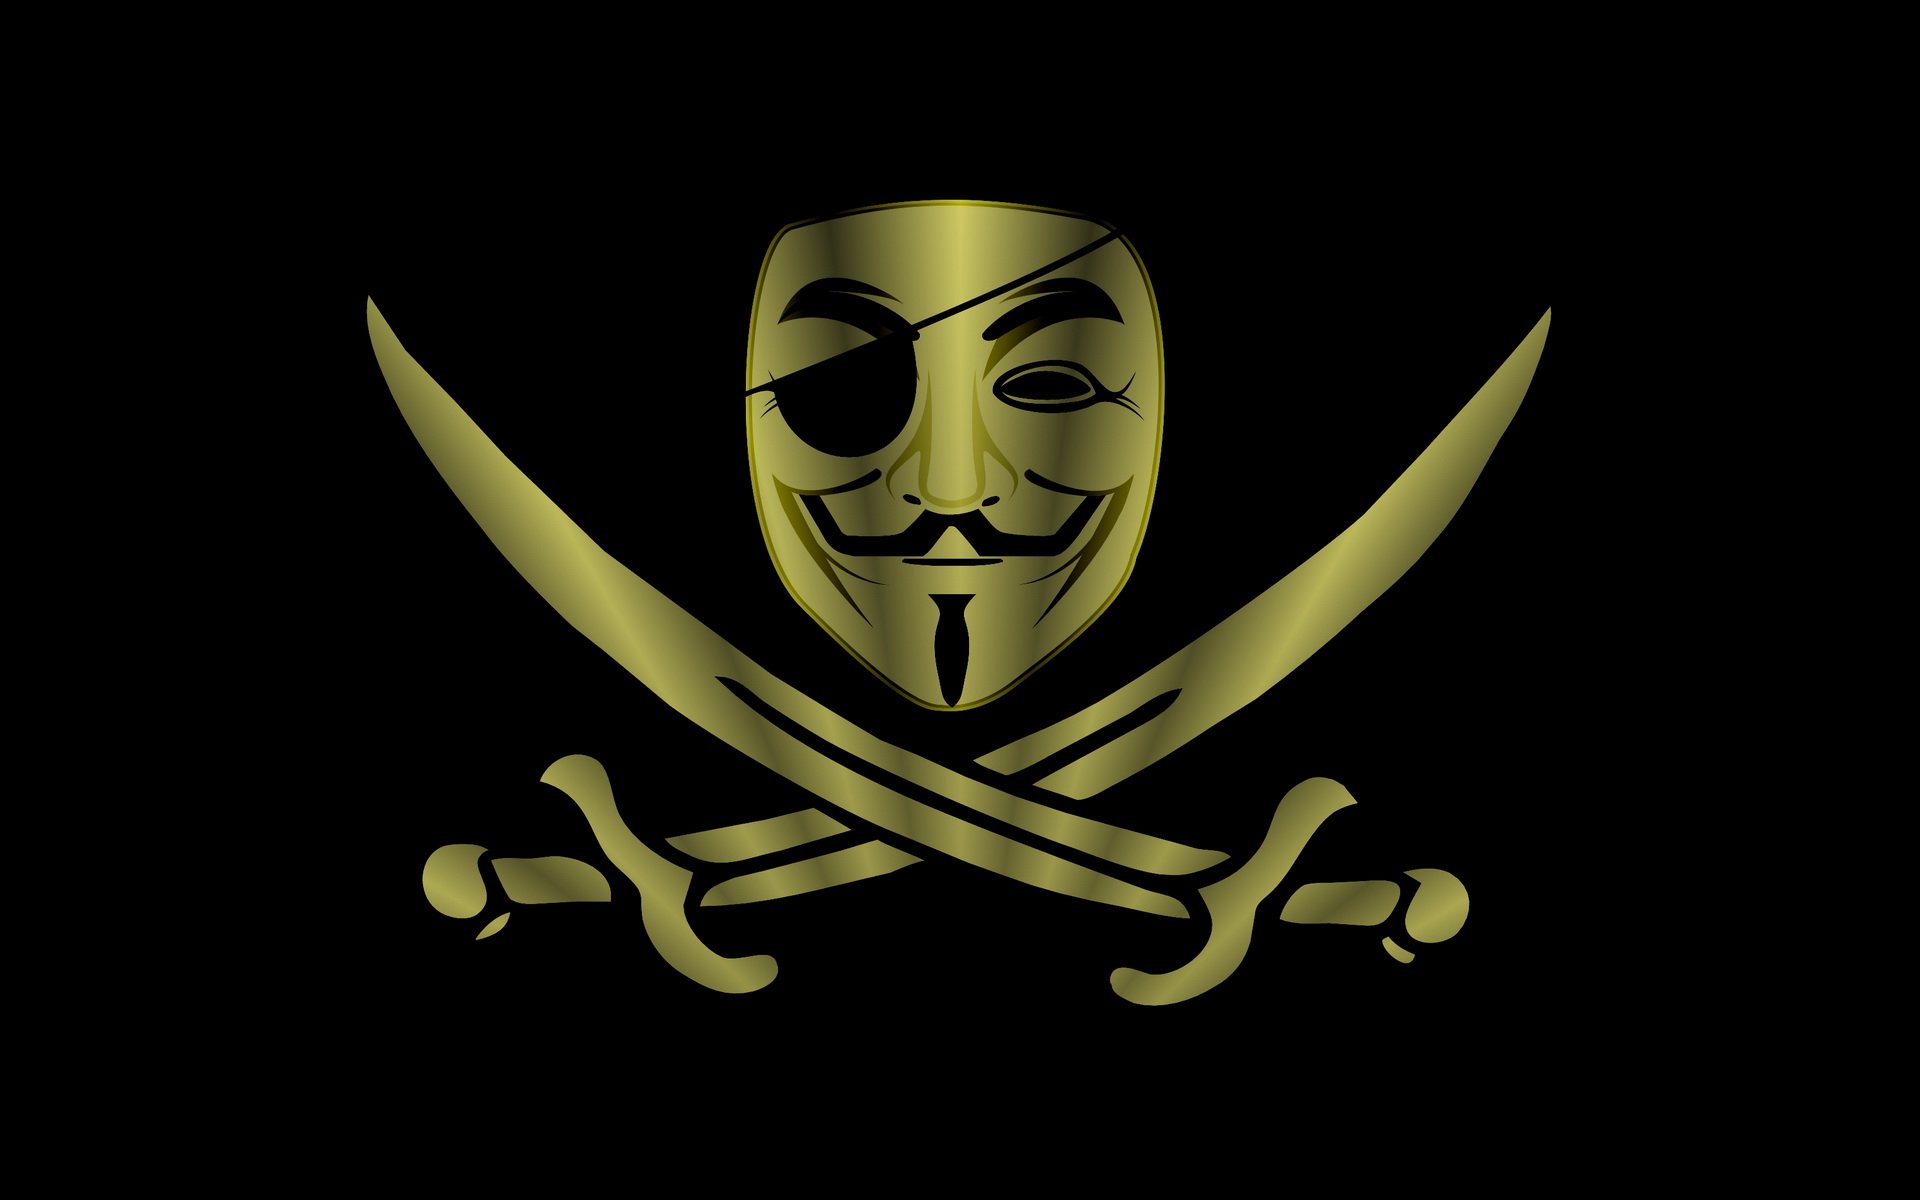 Anonymous, Mask, Sadic, Dark, Anarchy, Hacker, Hacking, - Anonymous Pirate Flag , HD Wallpaper & Backgrounds